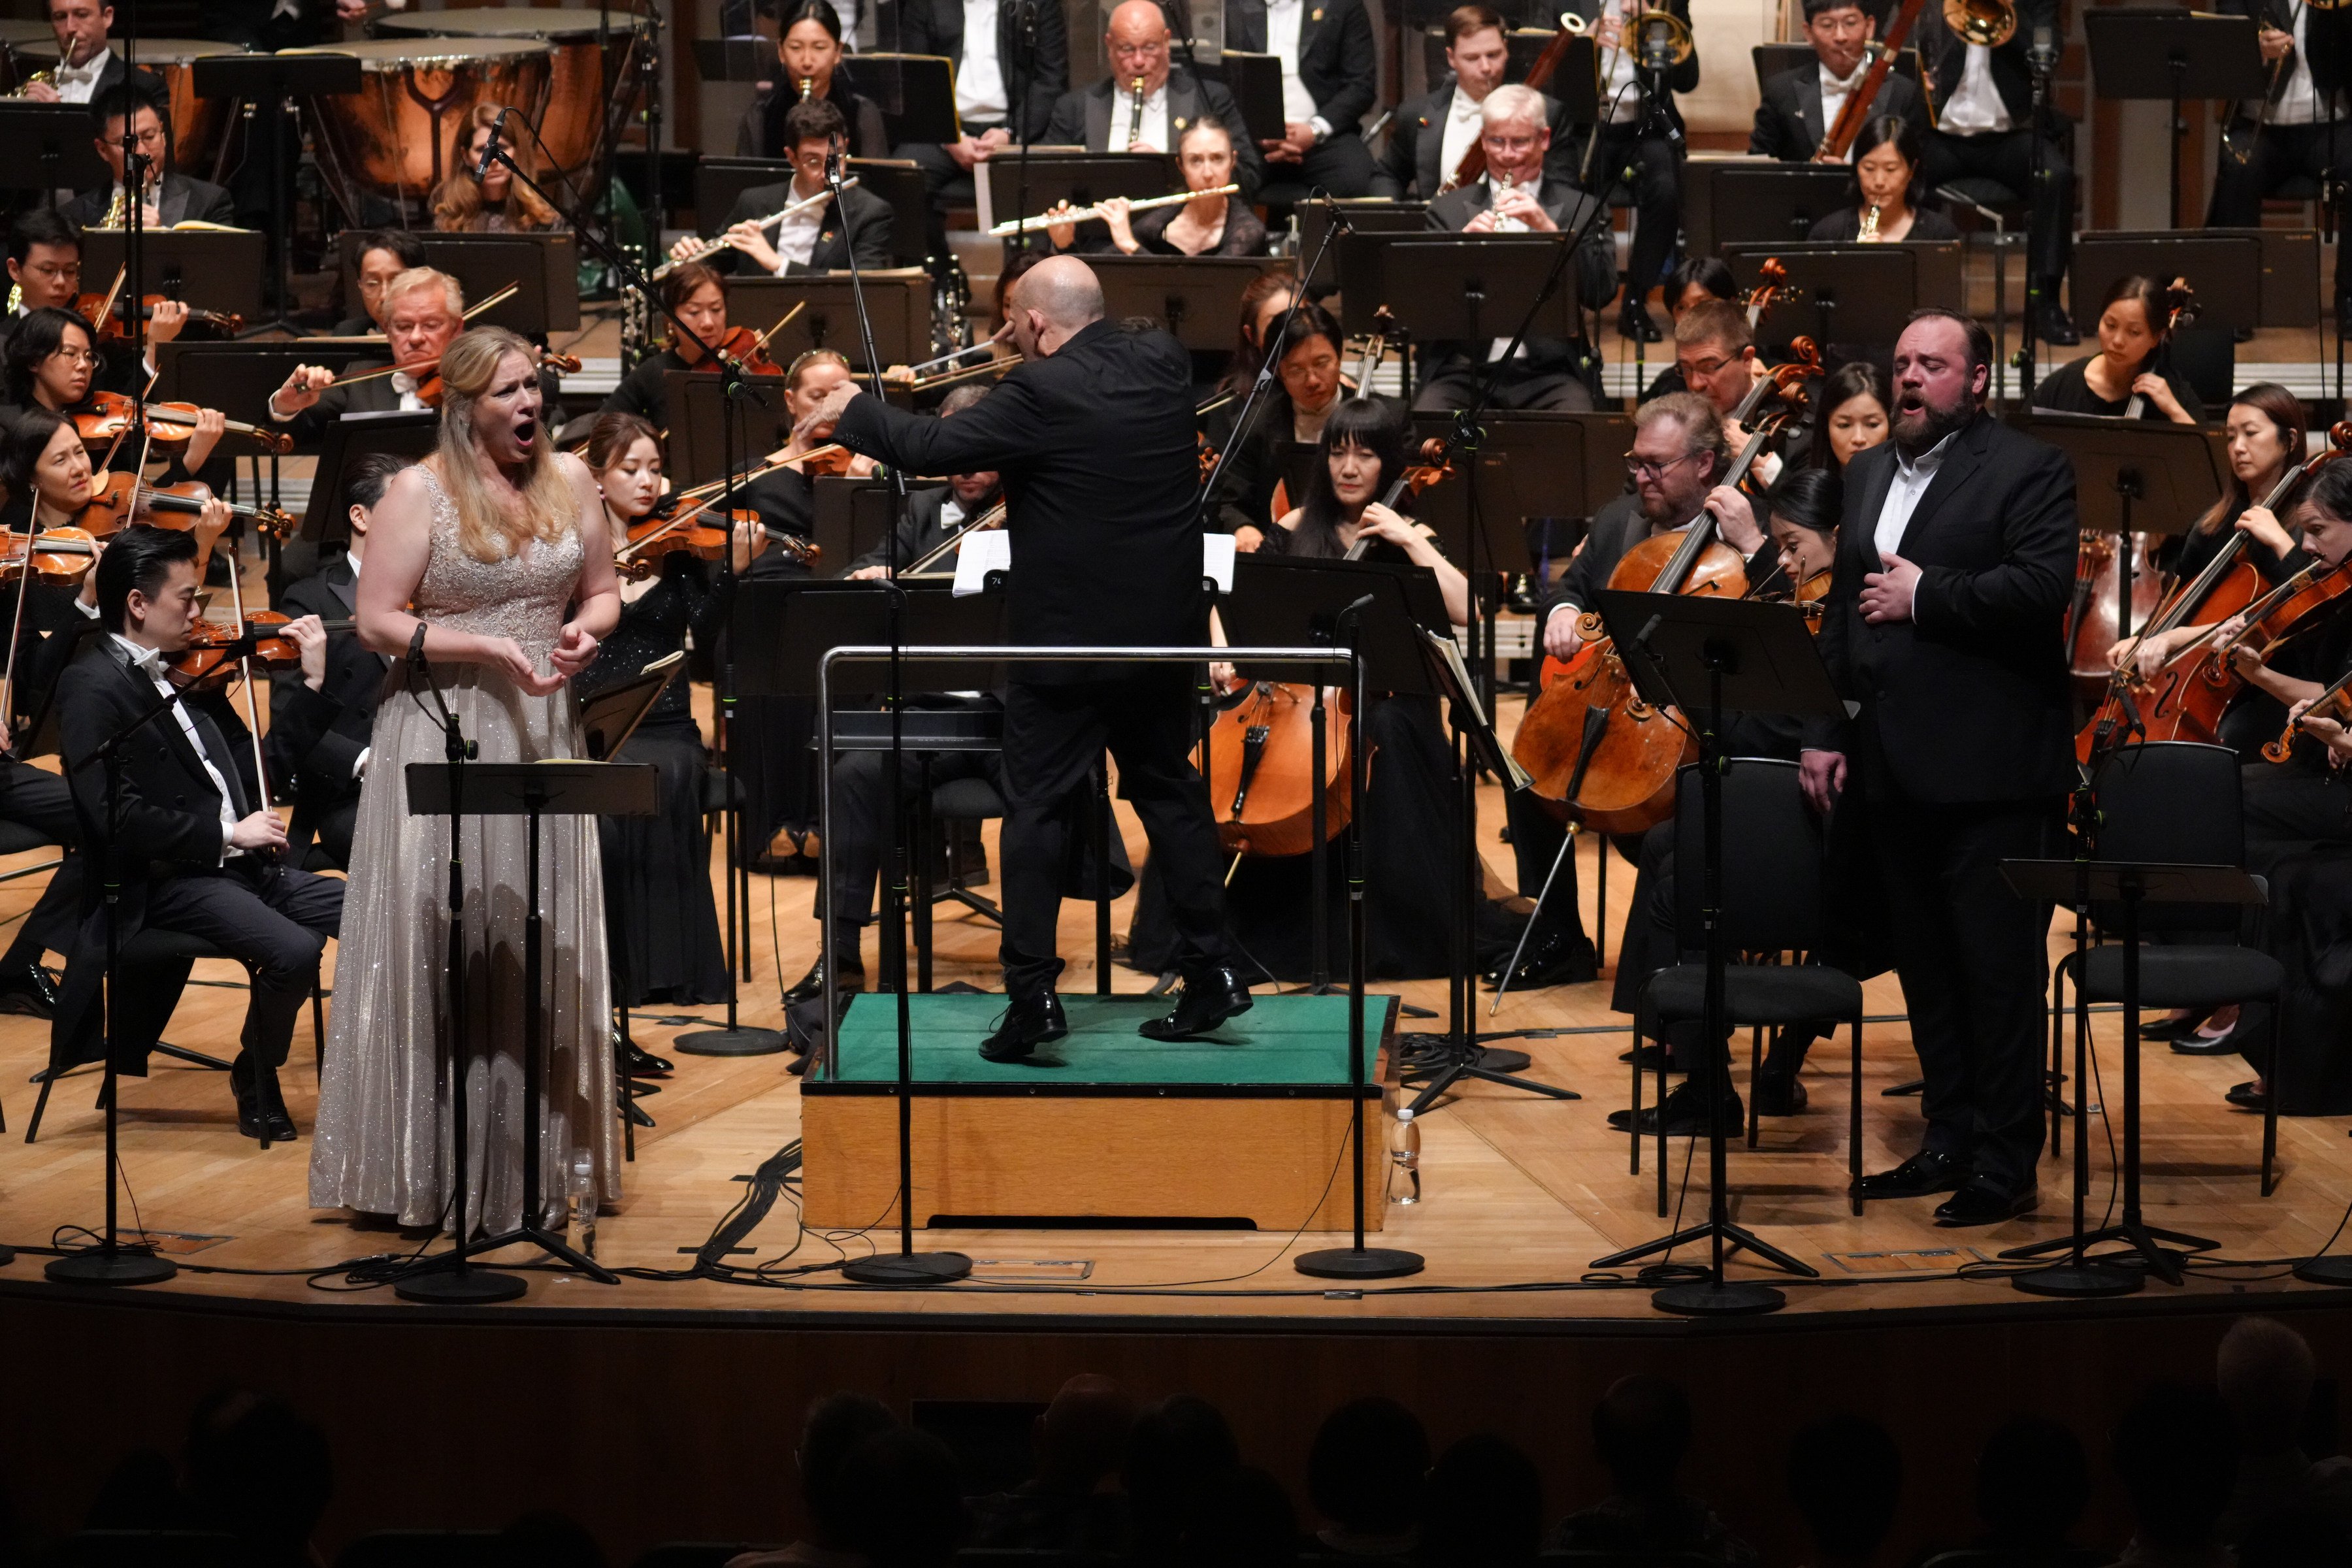 Soprano Jennifer Holloway (left) and bass-baritone Brian Mulligan (right) with the Hong Kong Philharmonic Orchestra under music director Jaap van Zweden during the June 21, 2024 performance of Richard Wagner’s opera The Flying Dutchman. Photo: Desmond Chan/HK Phil